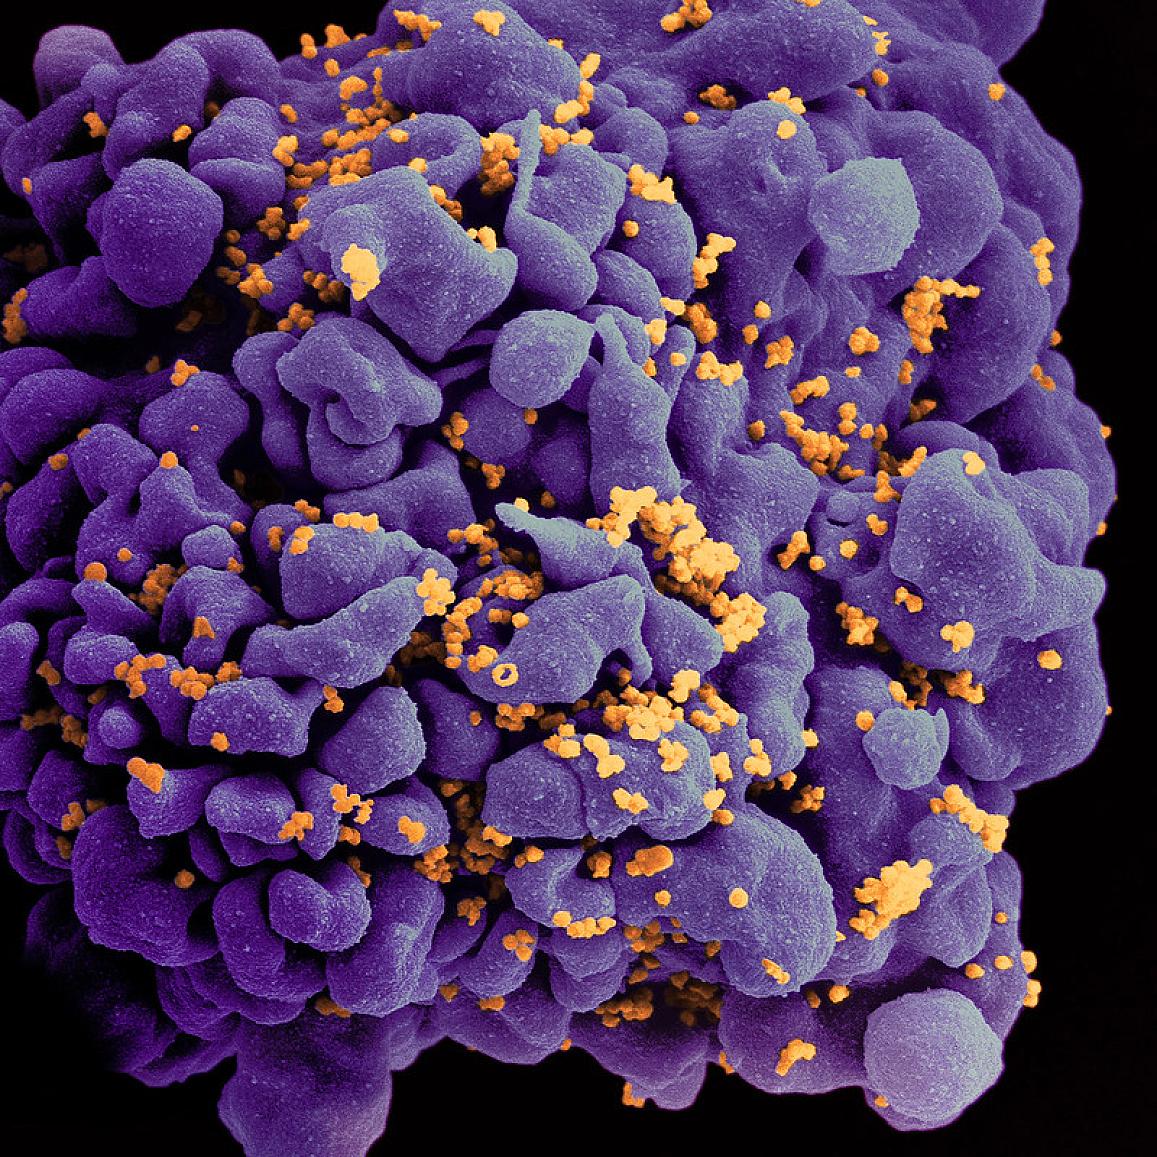 Scanning electron micrograph of an HIV-infected H9 T cell, colorized in Halloween colors. NIAID